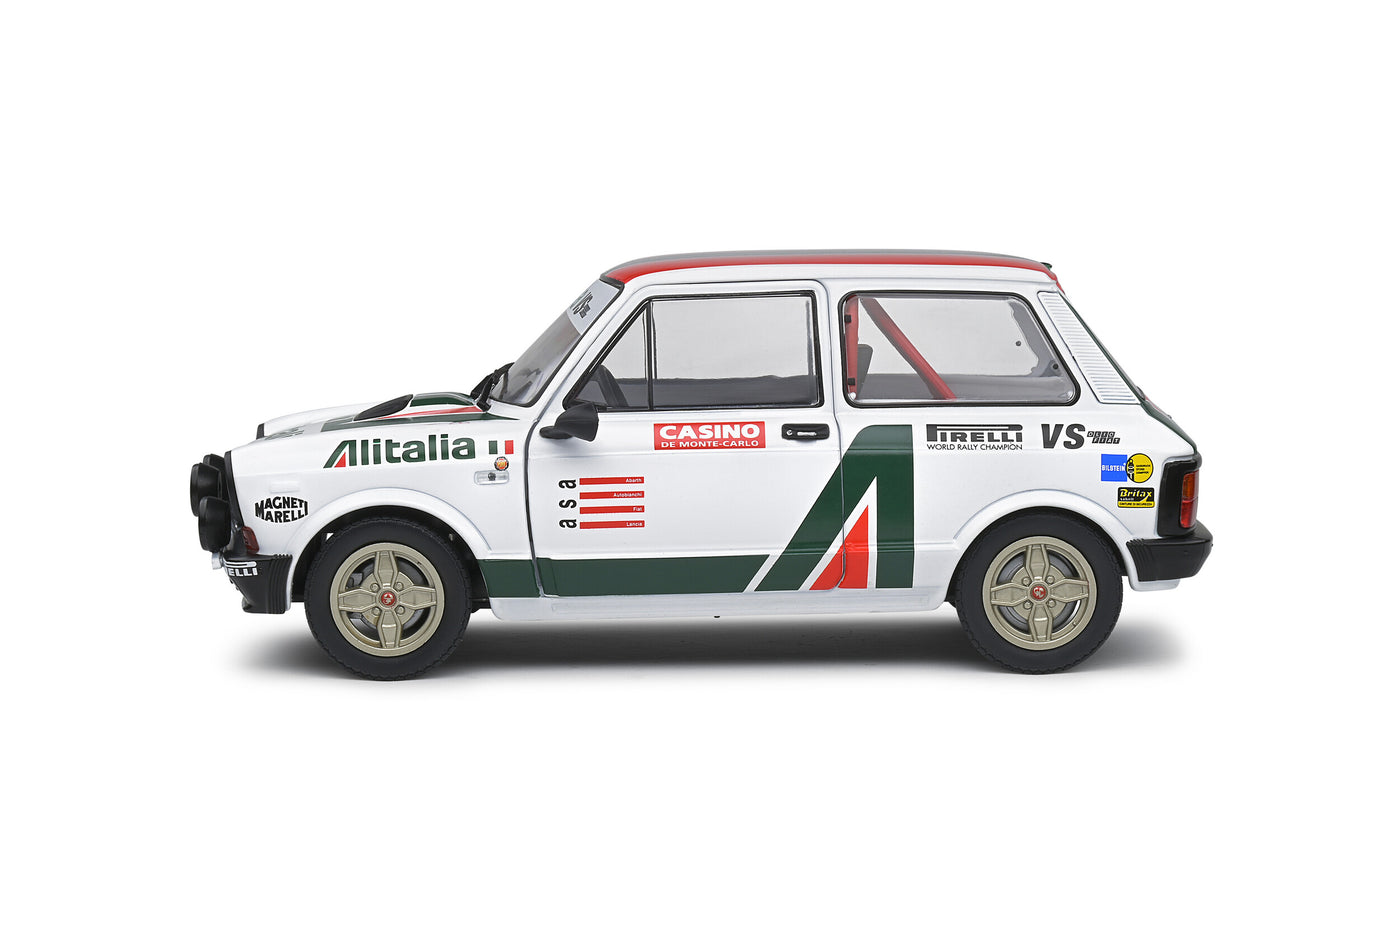 1980 Autobianchi Abarth A112 Rally Set 1:18 - Diecast Scale Model | Solido